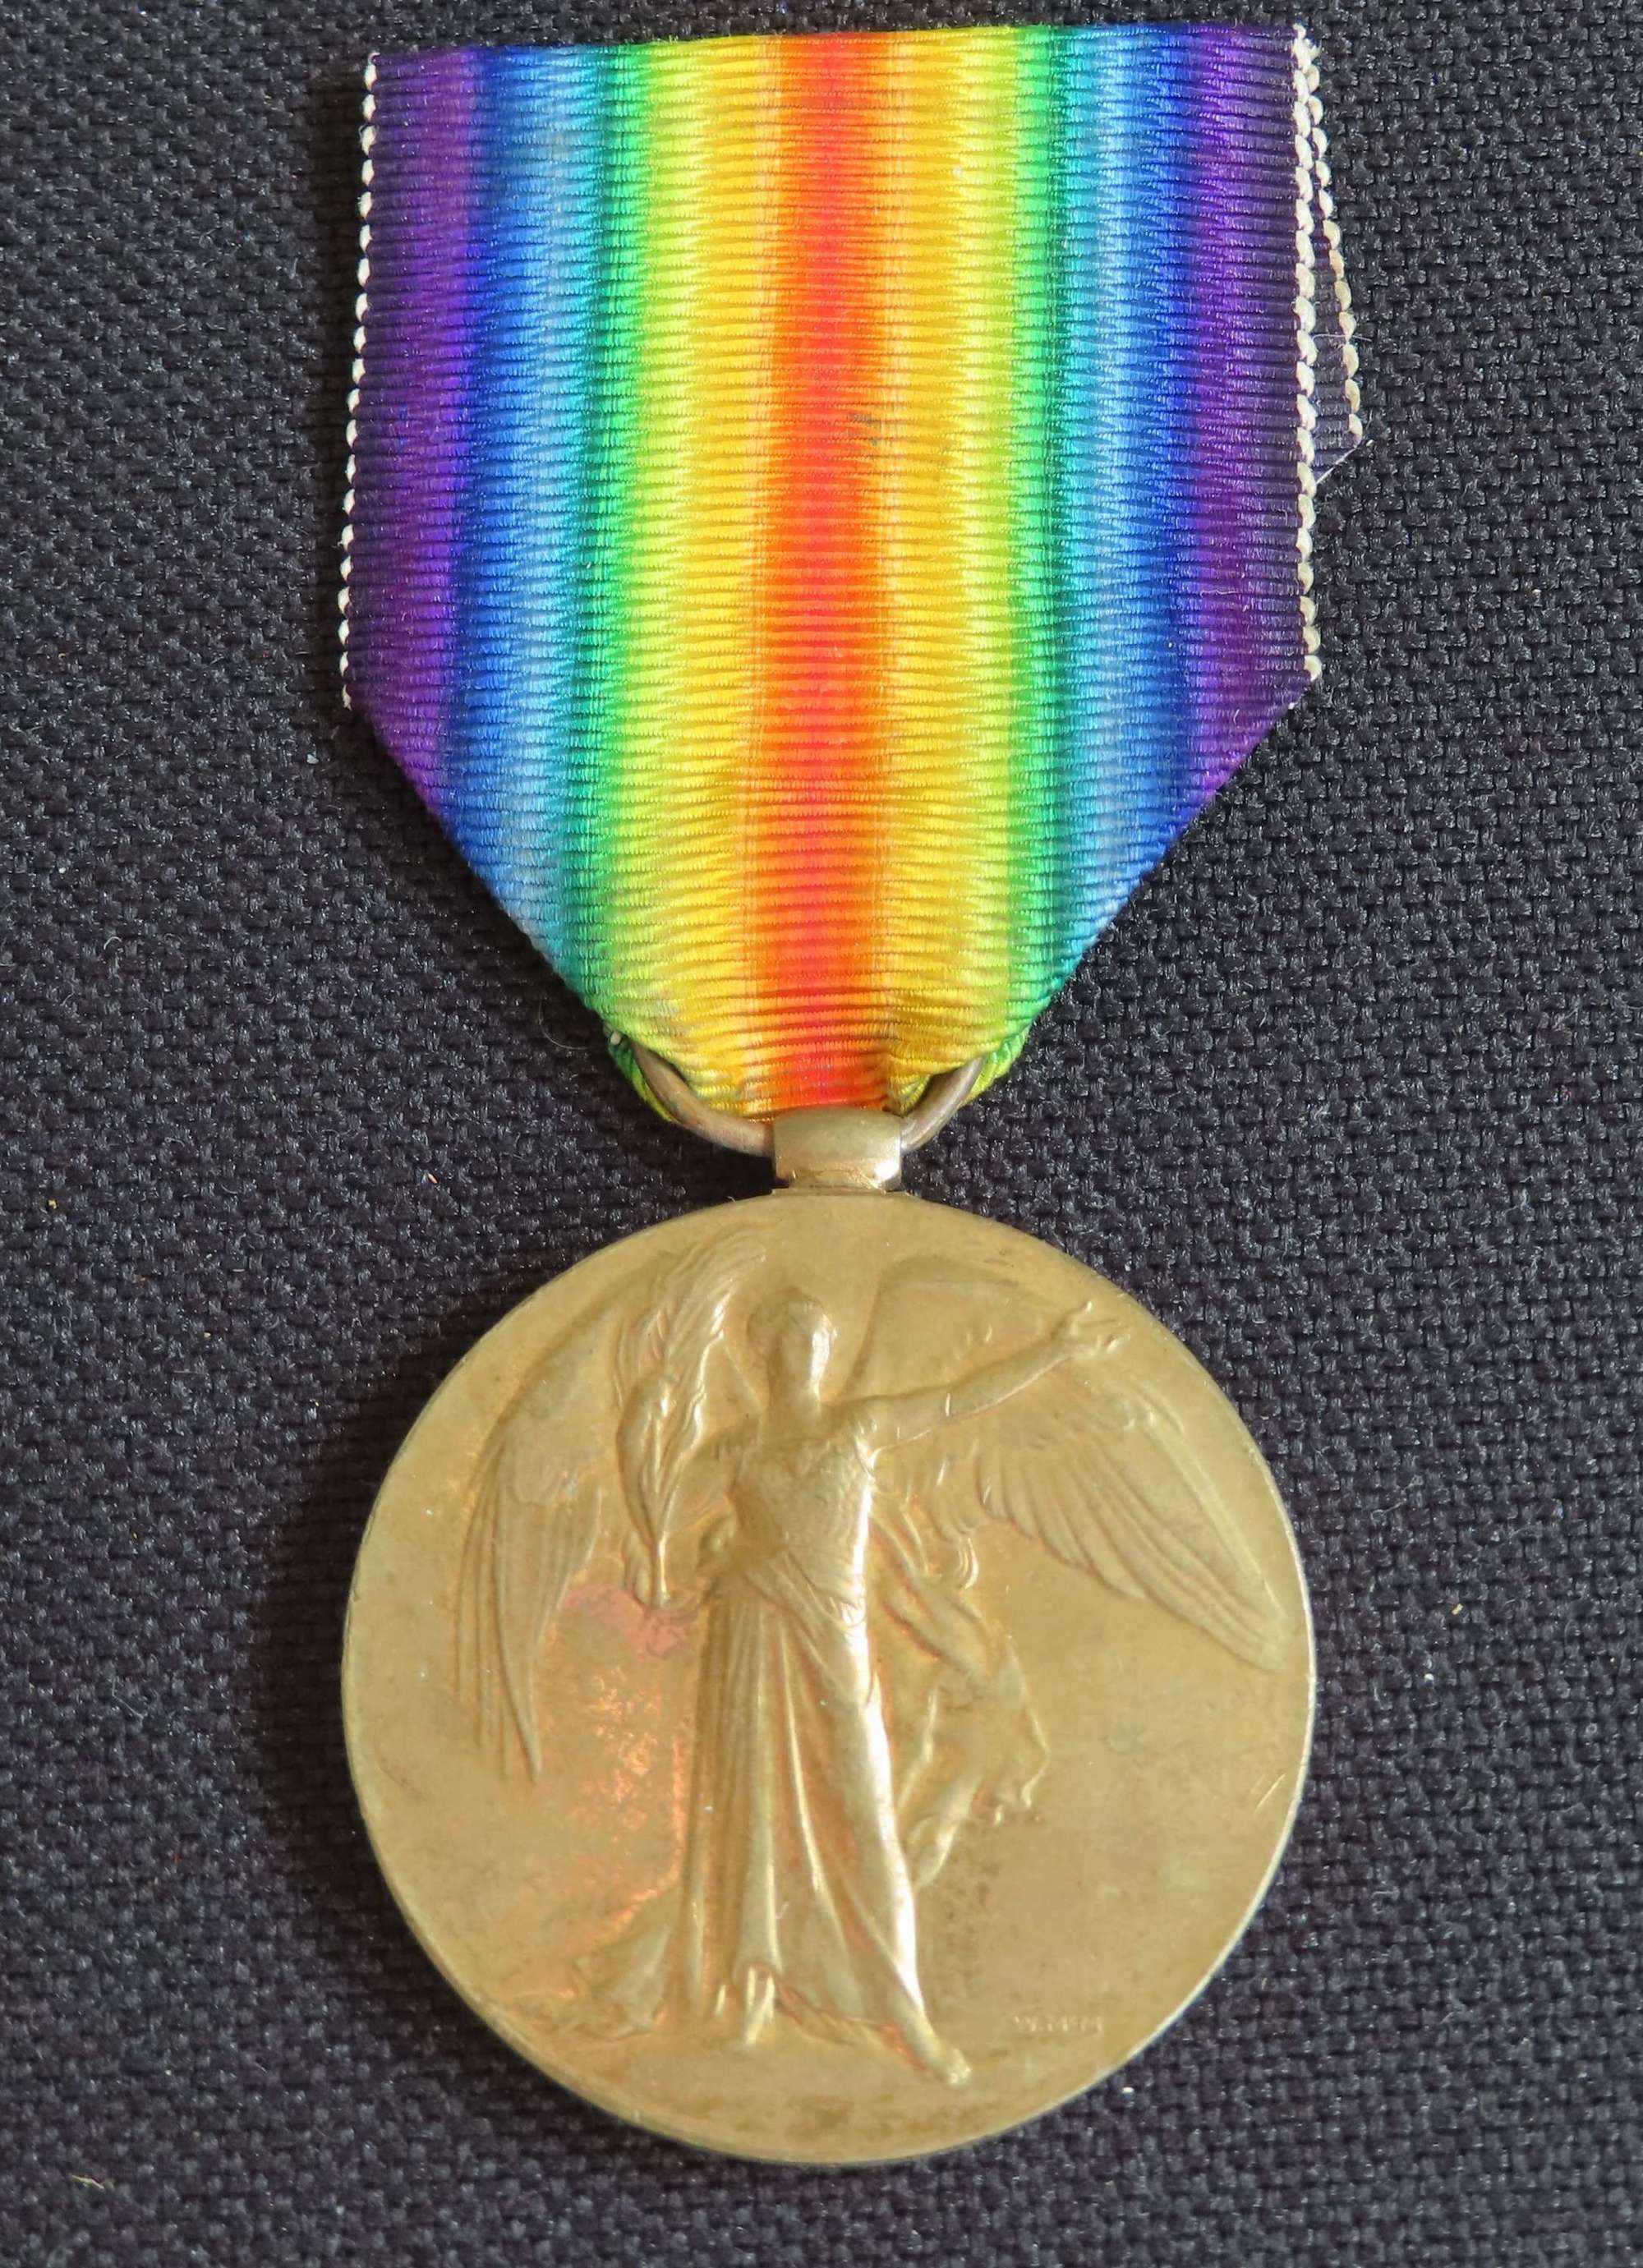 WW1 Died of wounds Victory medal to Pte McMahon Royal Scots Edinburgh